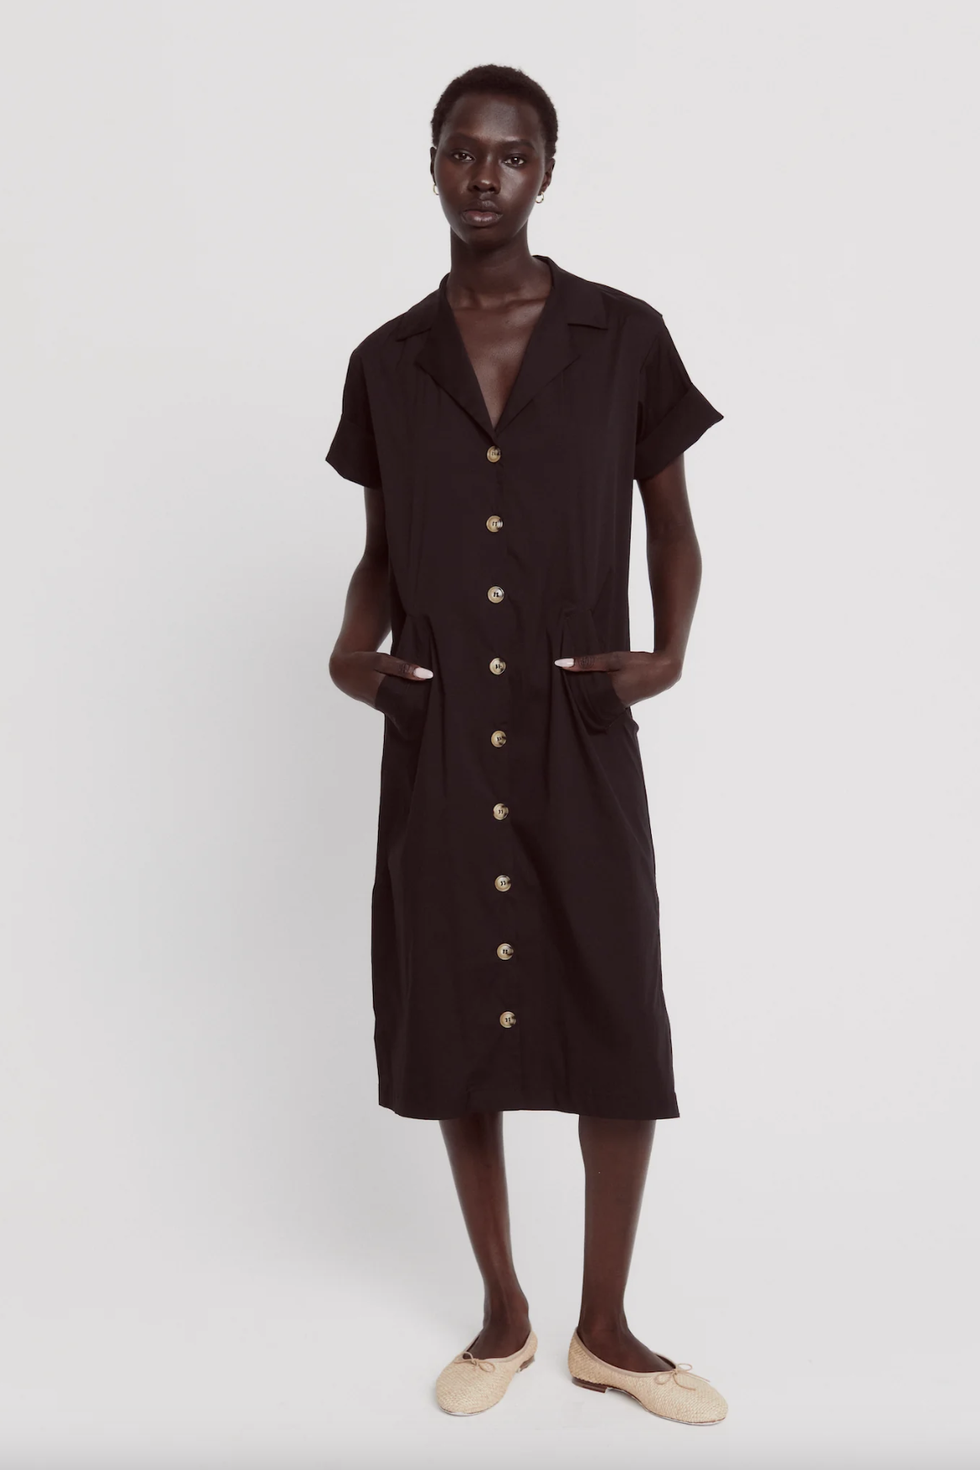 Duster, a New Dress Label, Perfected the Day Dress